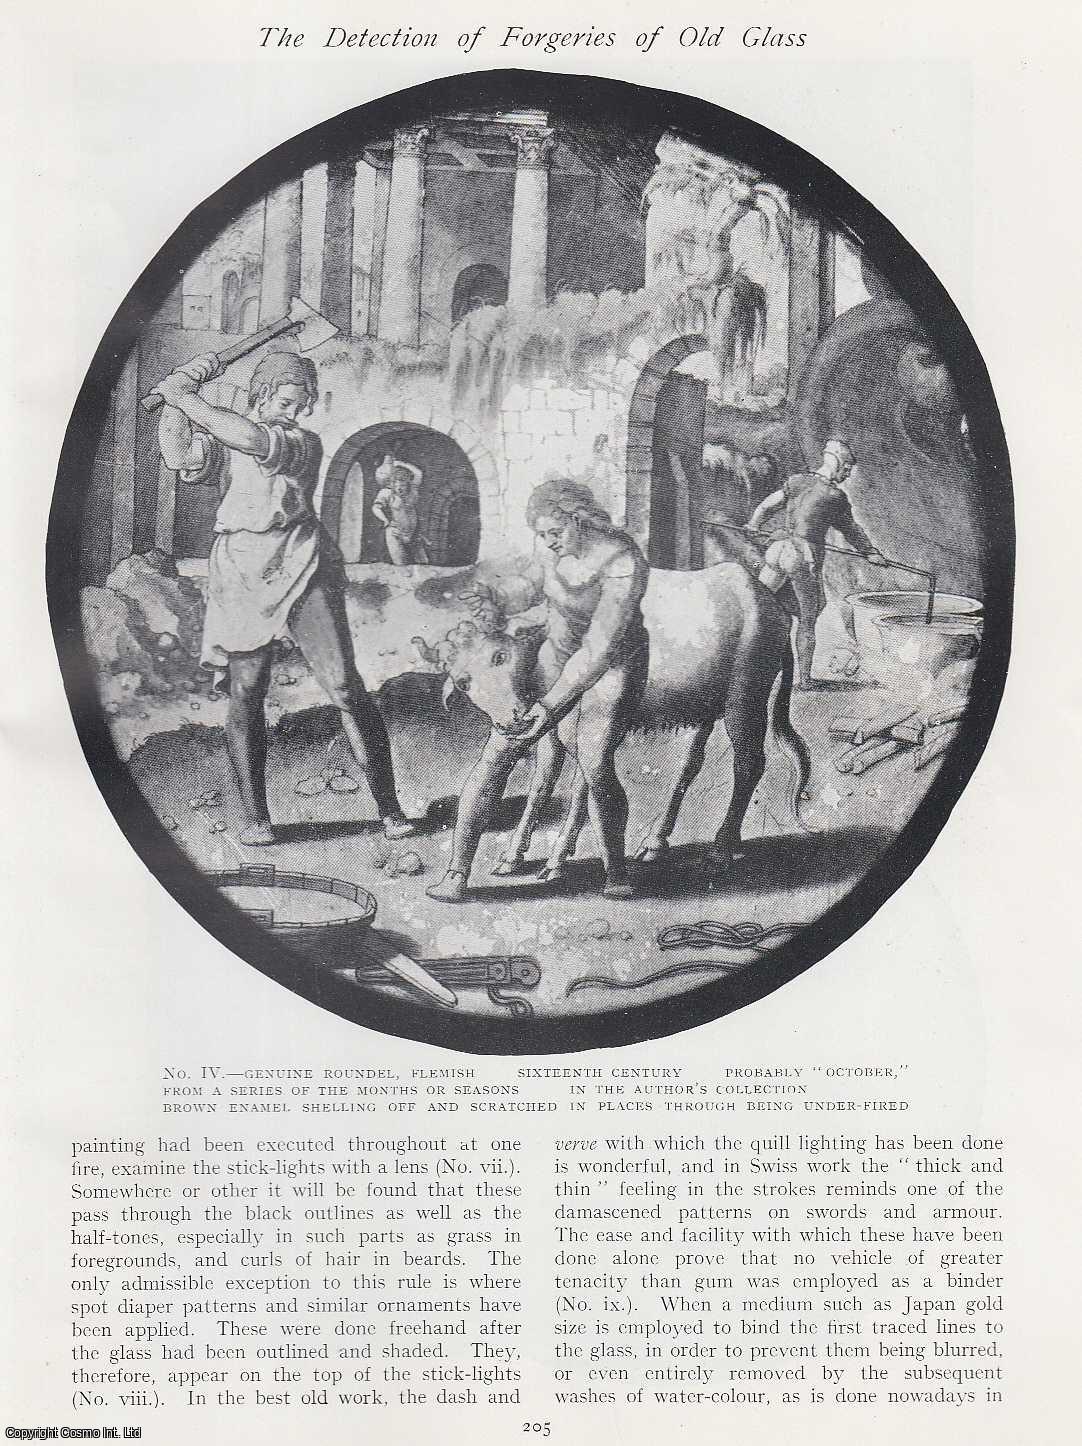 John A. Knowles - The Detection of Forgeries of Old Glass. An original article from The Connoisseur, 1924.